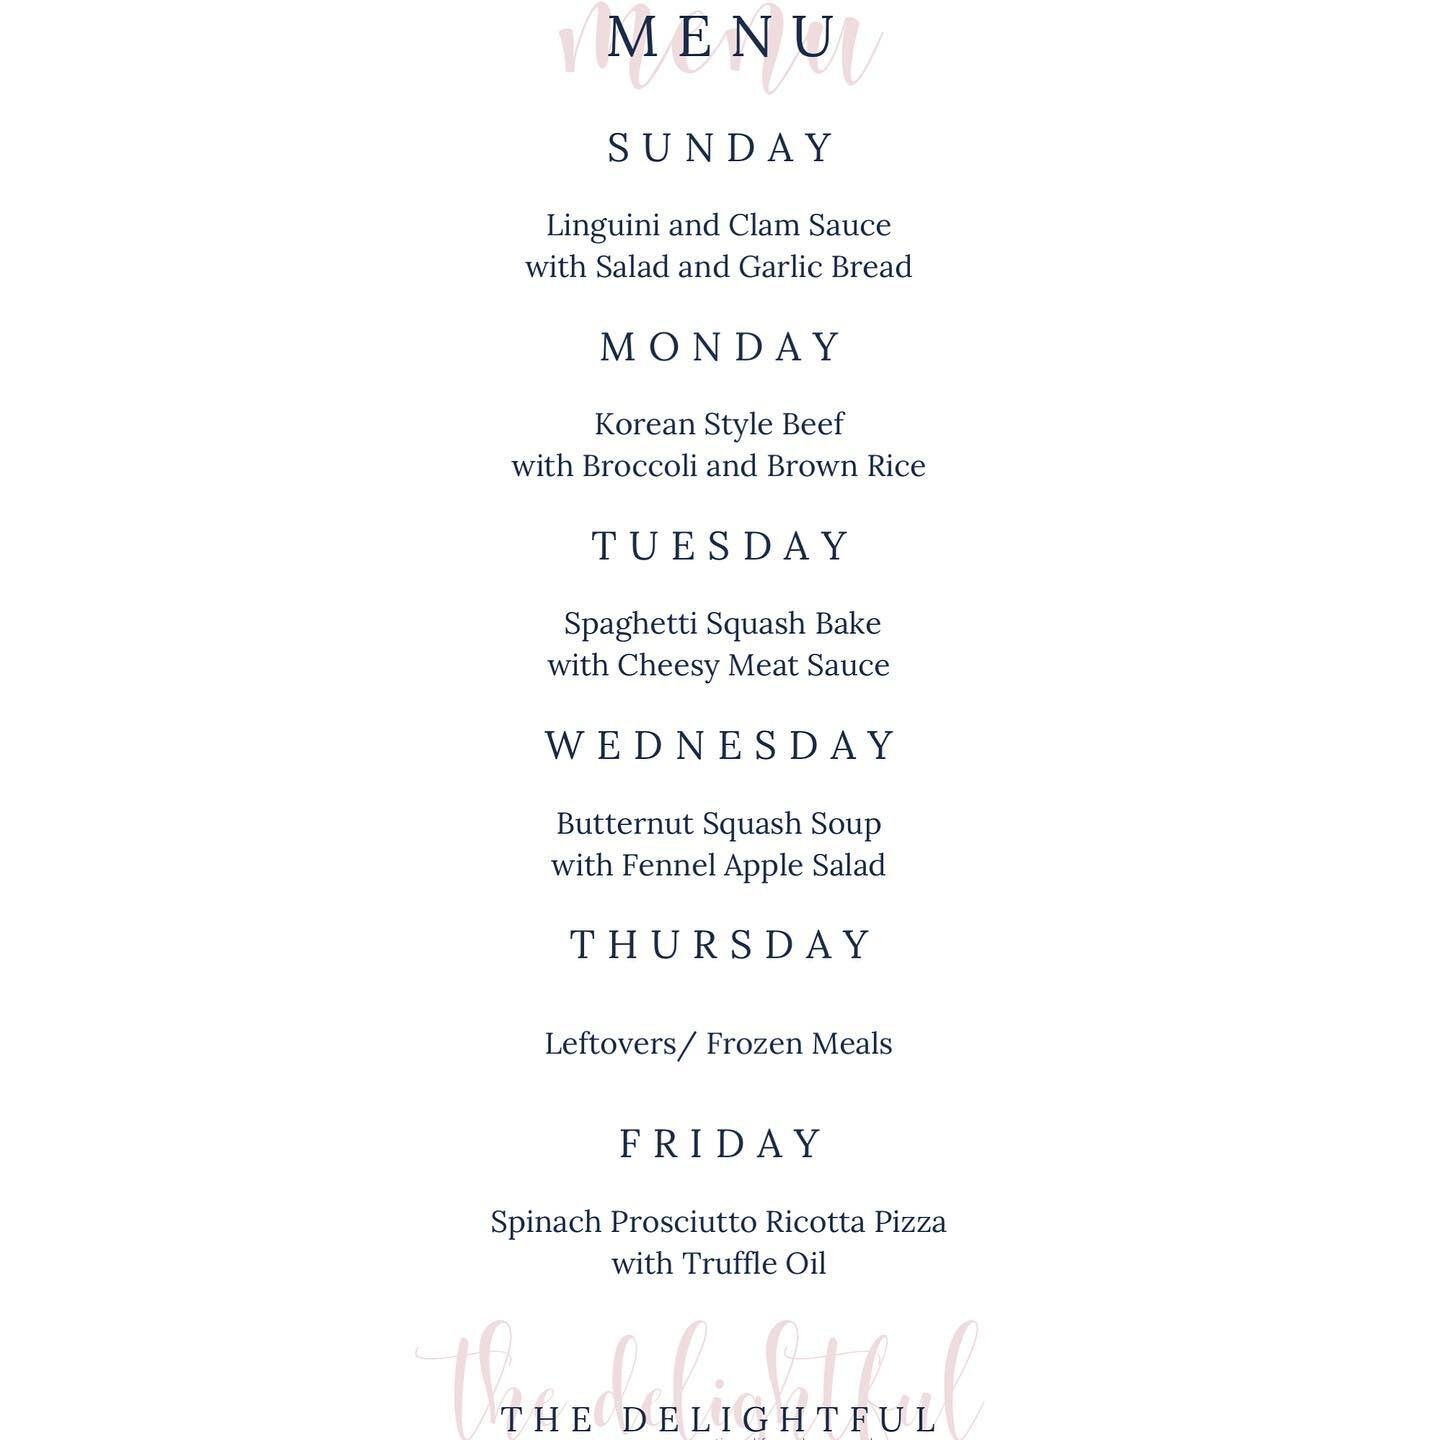 This week&rsquo;s menu 🍽 features some classic fall 🍁 flavors, including two types of squash, apples 🍏 and fennel since we&rsquo;re finally getting cooler 🍂 weather. There&rsquo;s one wildcard night when I know work 👩&zwj;💻will run late, and a 